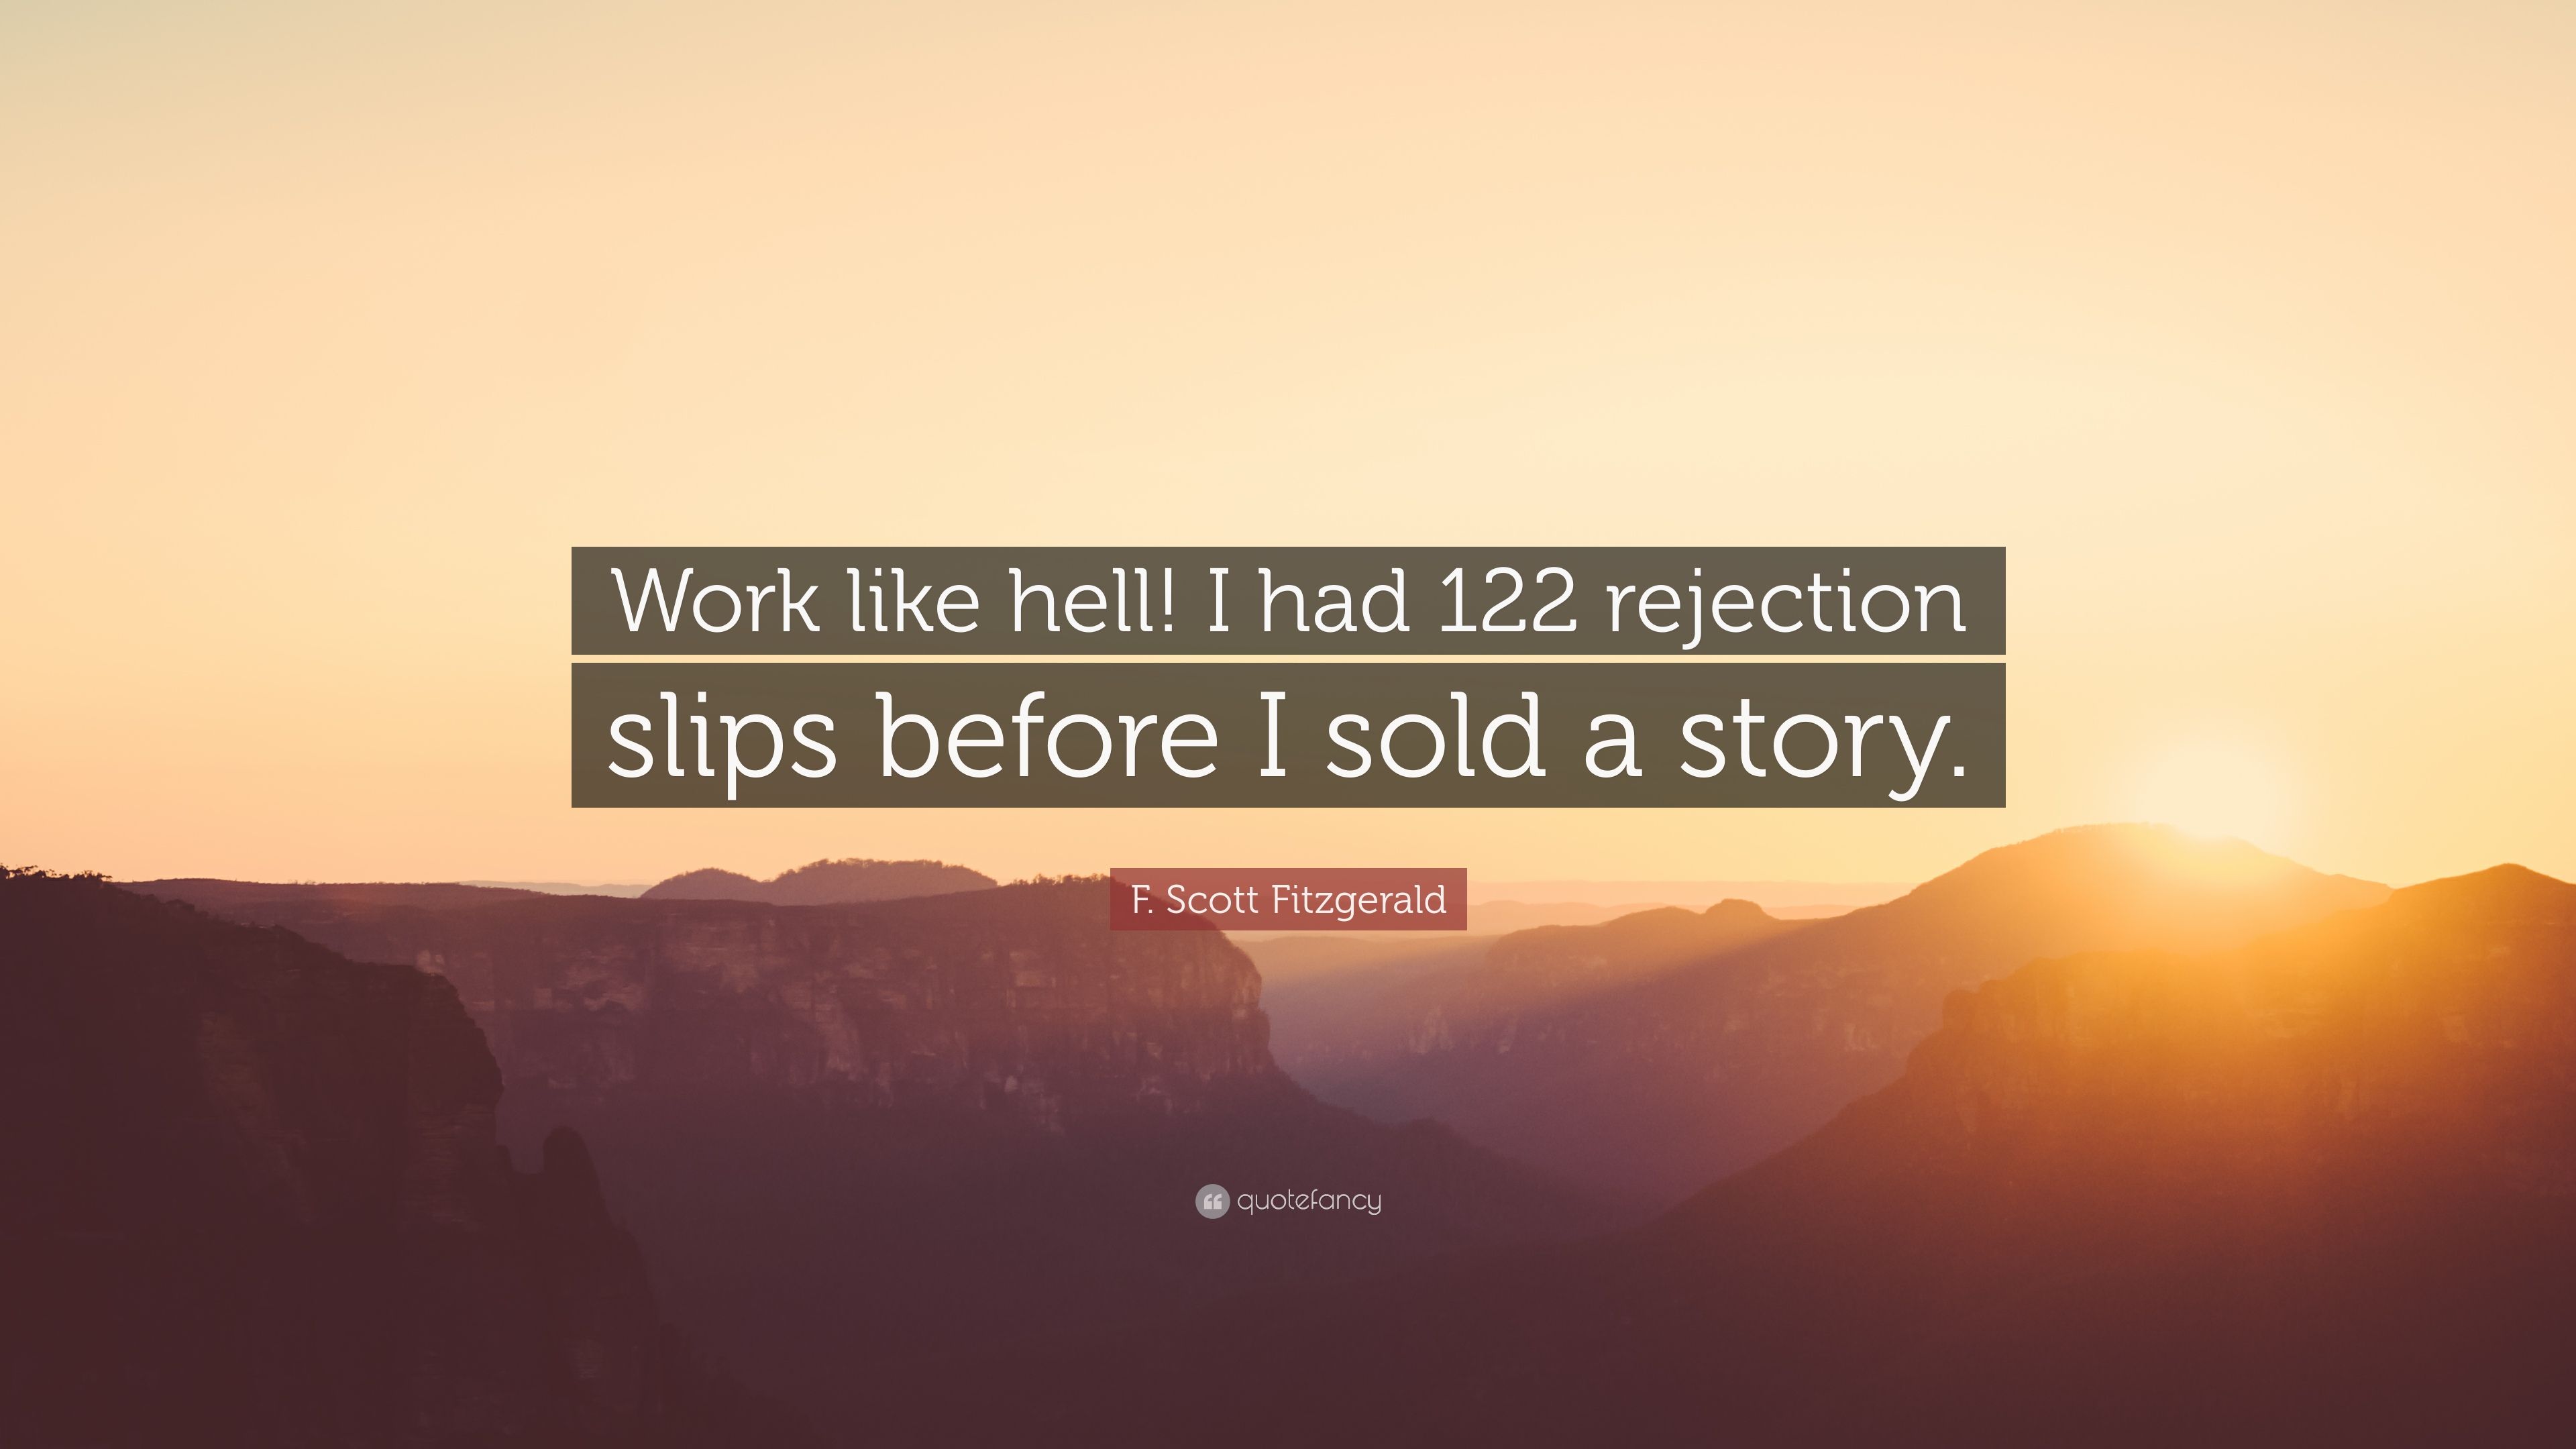 F. Scott Fitzgerald Quote: “Work like hell! I had 122 rejection slips before I sold a story.” (12 wallpaper)